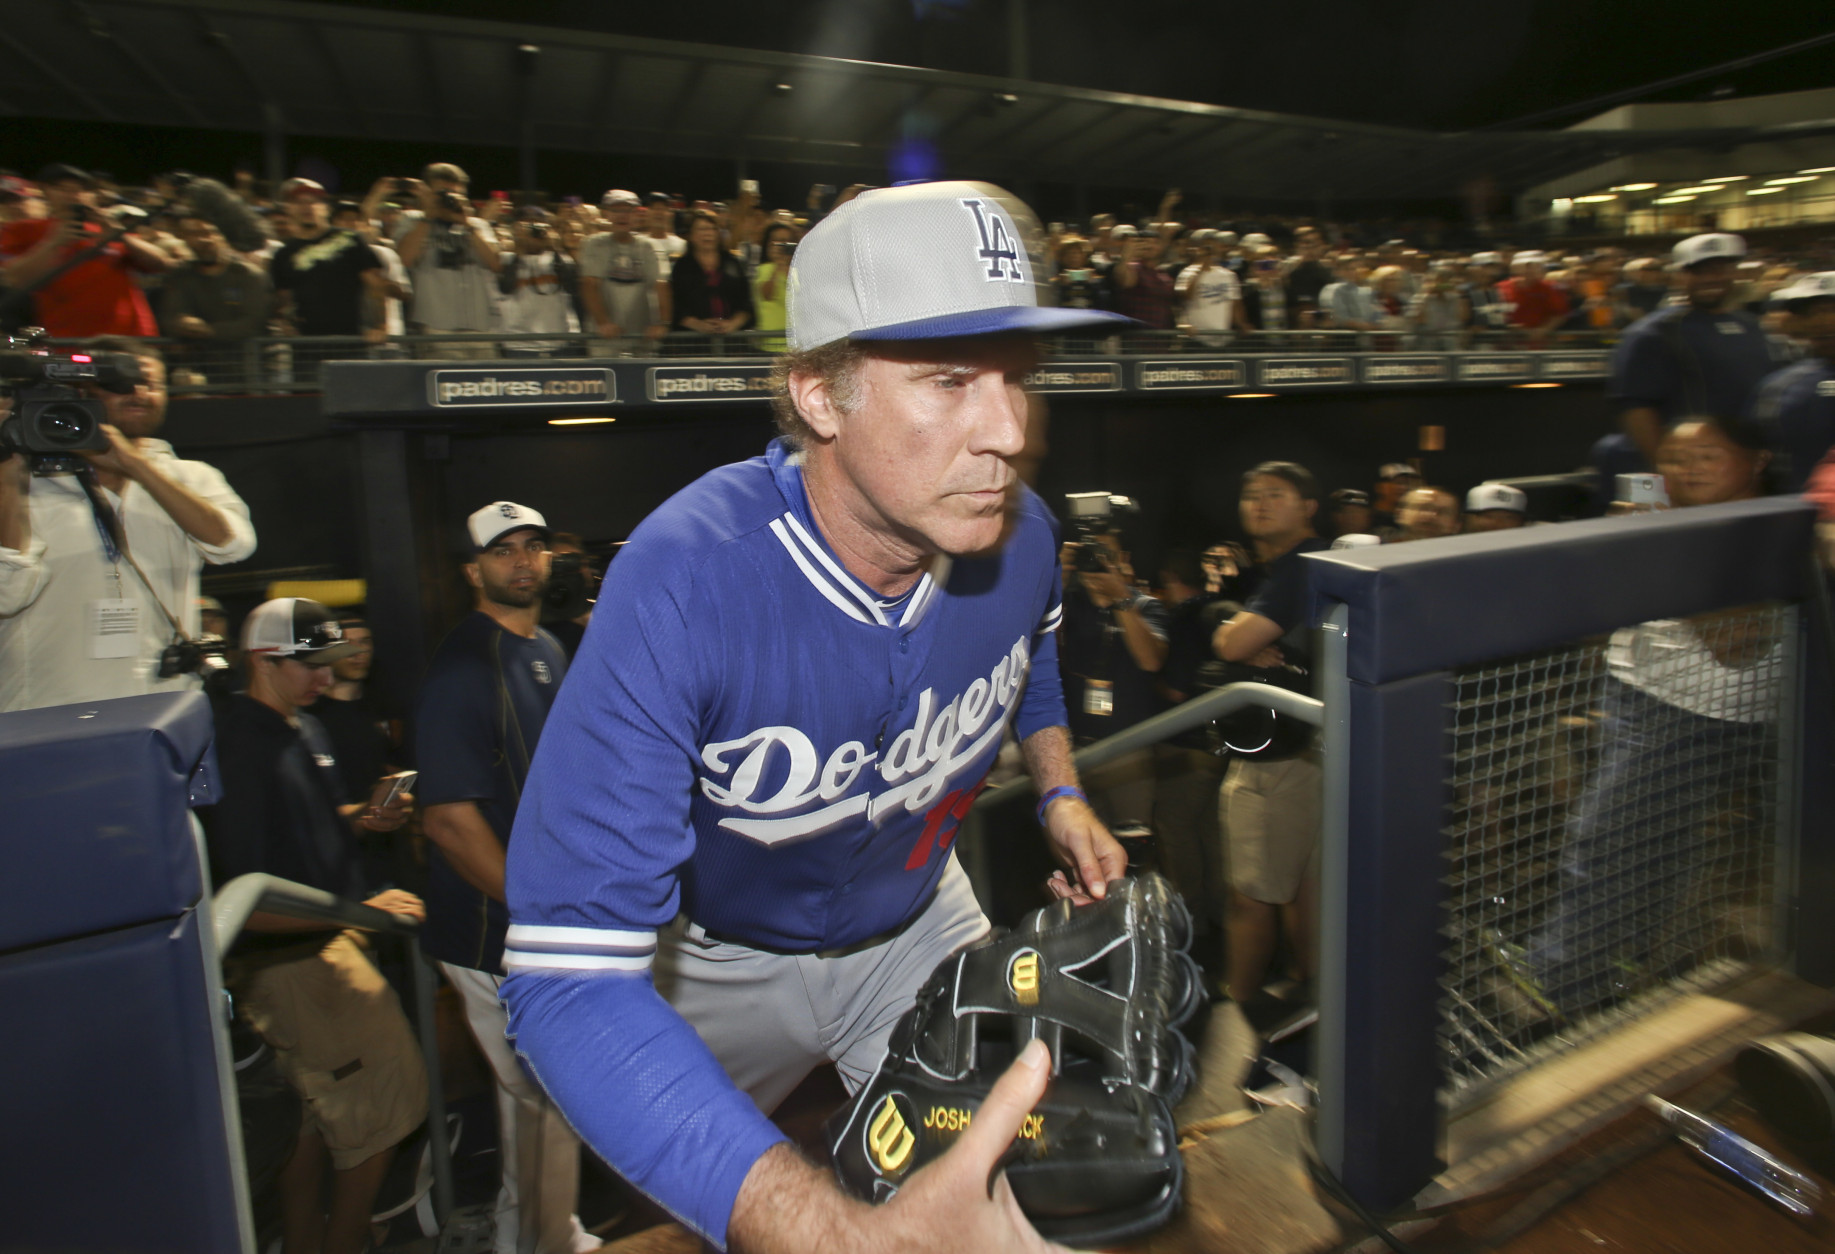 Actor Will Ferrell exits the dugout wearing a Los Angeles Dodgers uniform as he comes in to pitch in a spring training baseball game between the Dodgers and the San Diego Padres on Thursday, March 12, 2015, in Peoria, Ariz.  (AP Photo/Lenny Ignelzi)